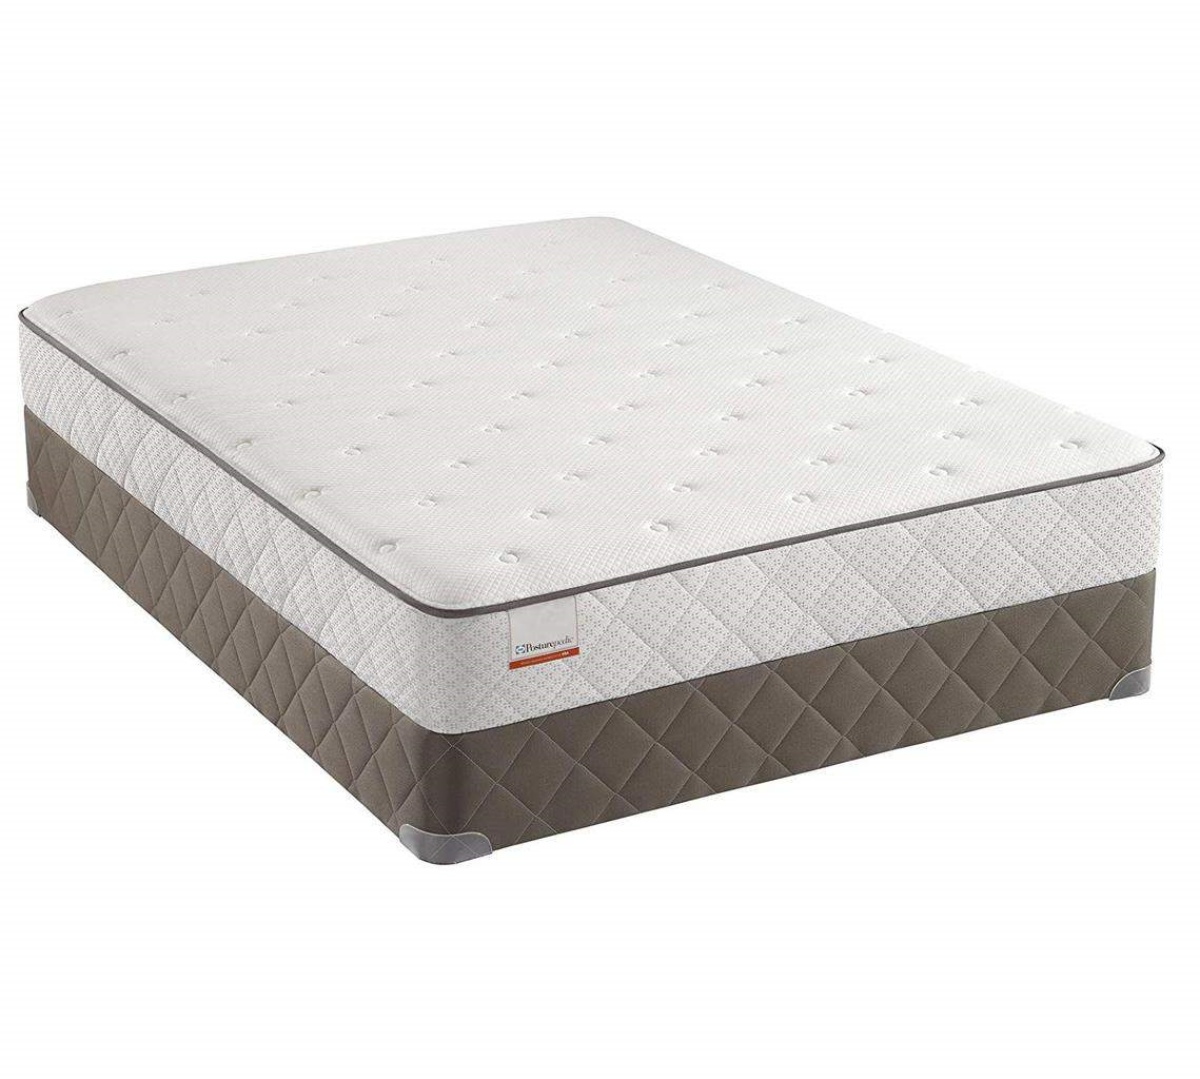 Which Mattress Is Better: Sealy Or Serta